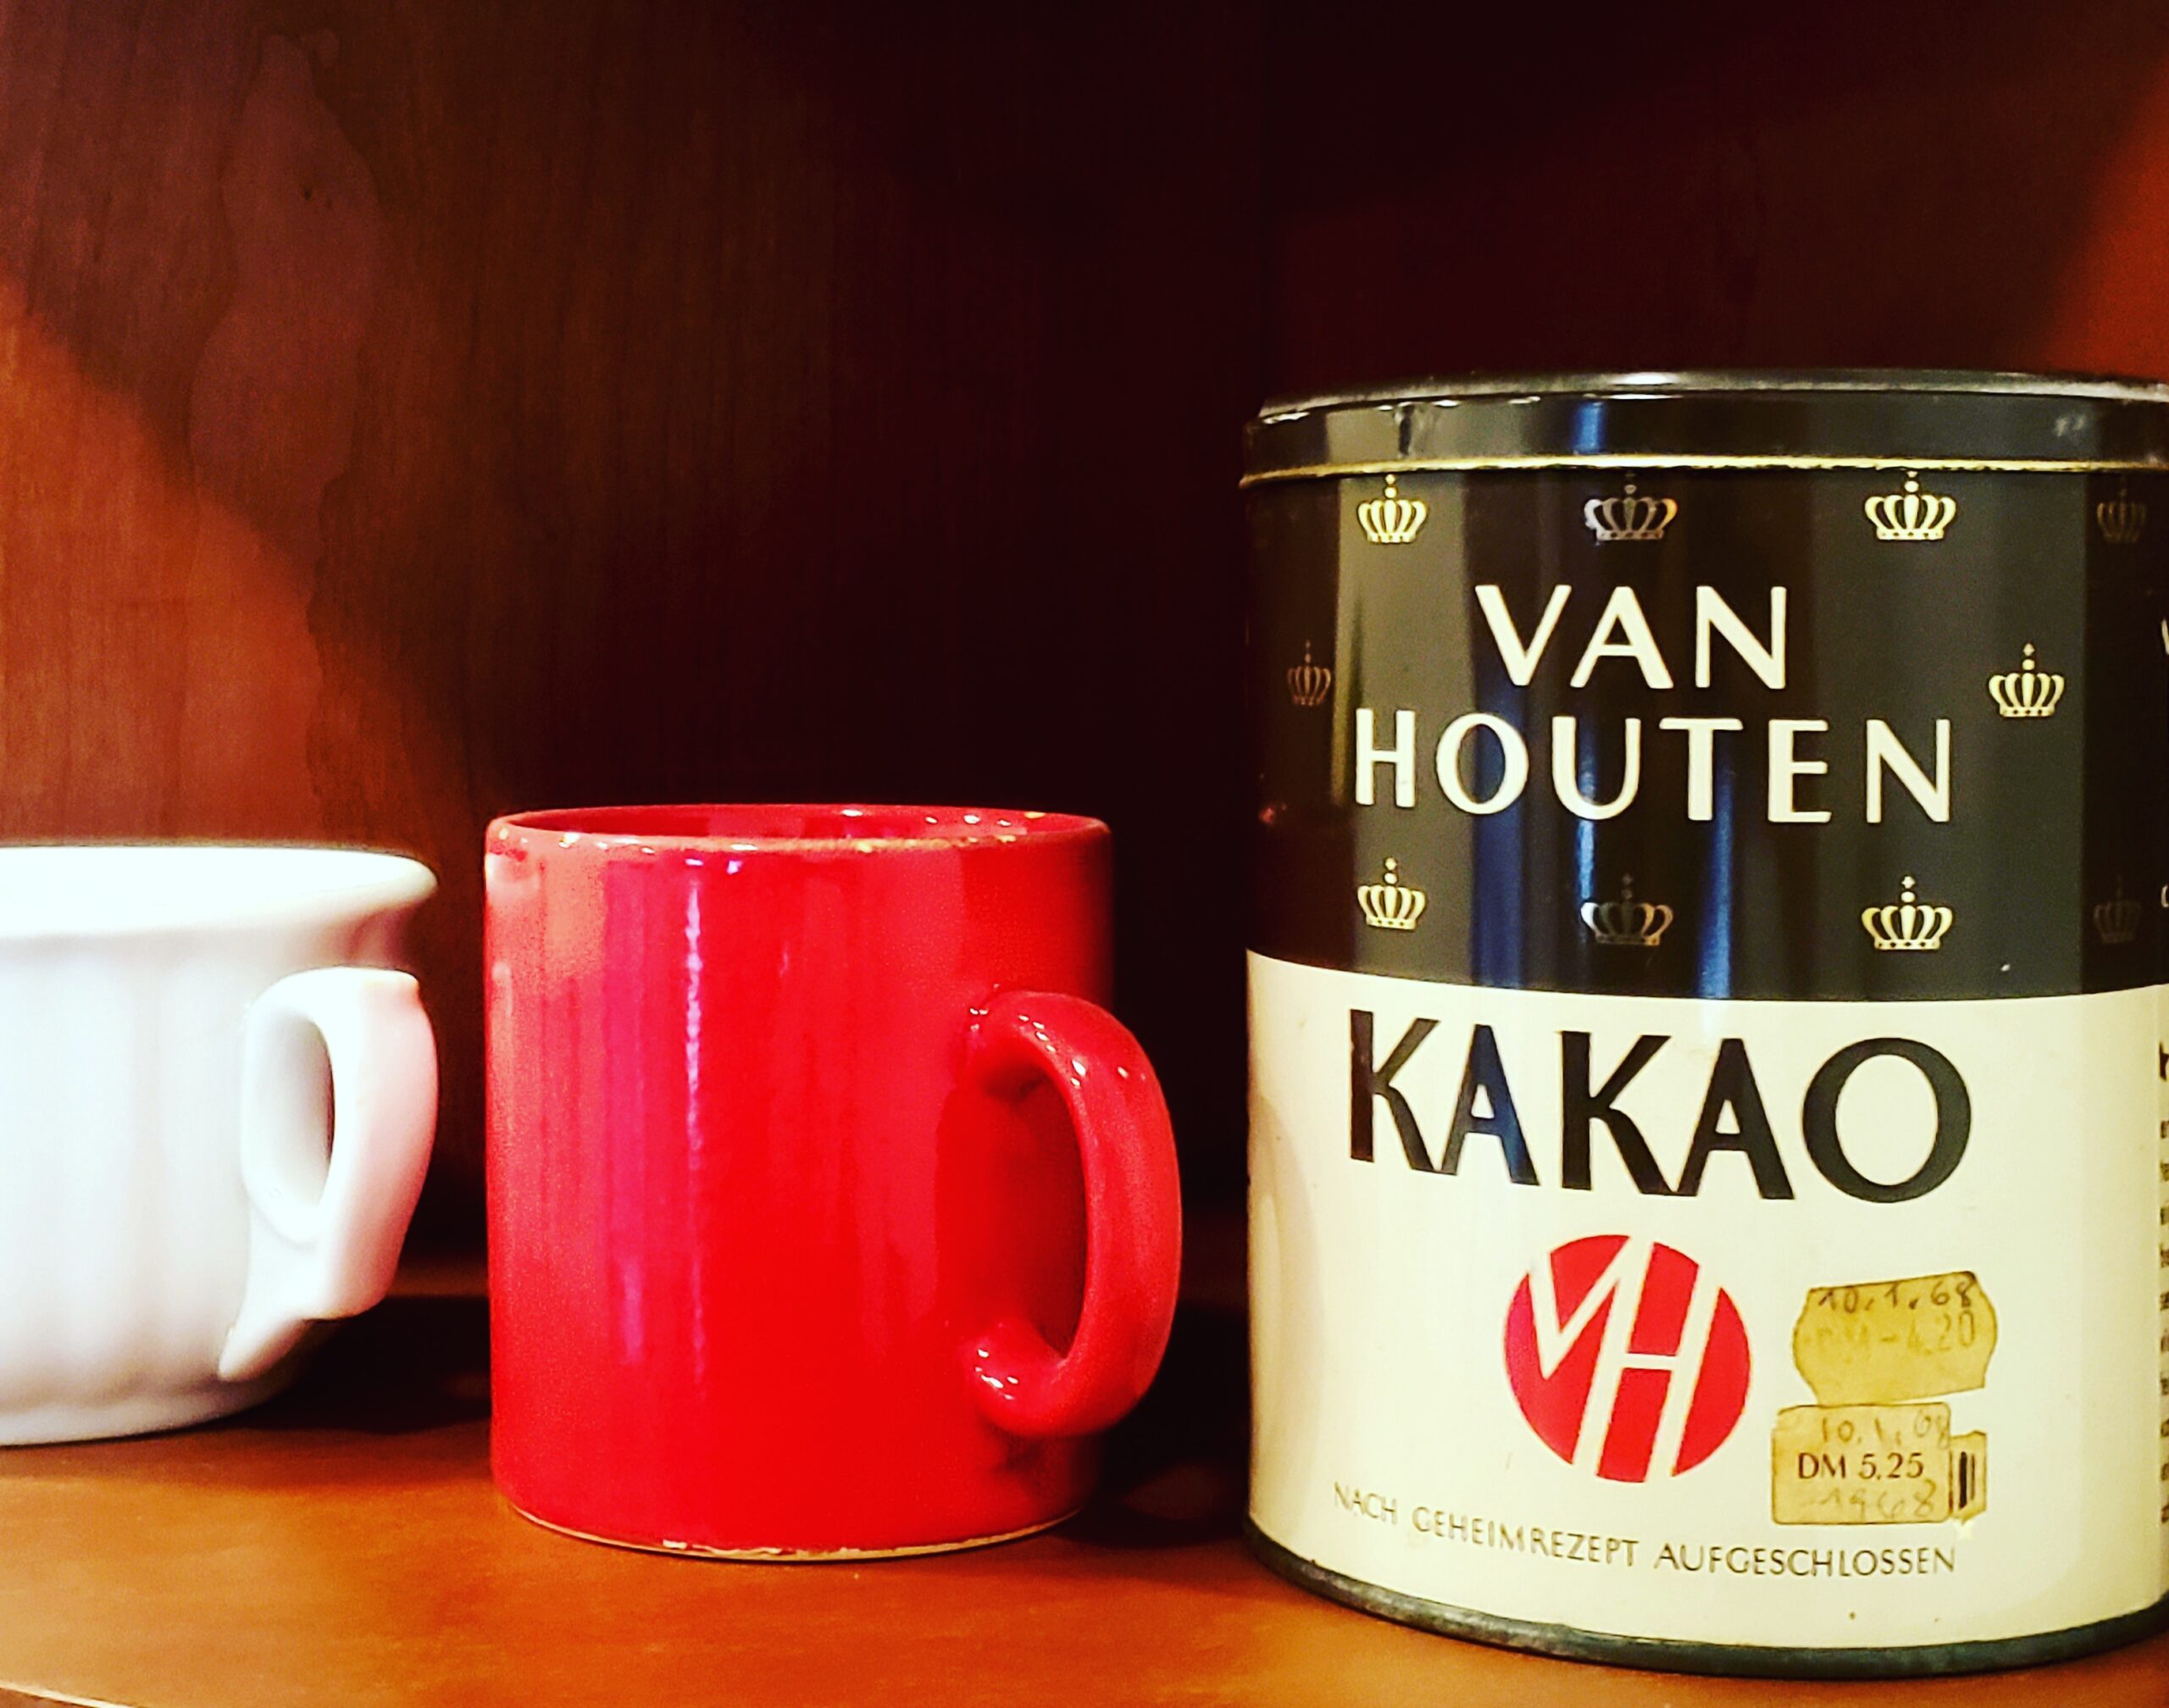 Van Houten cocoa tin on brown shelf with red and white mugs next to it